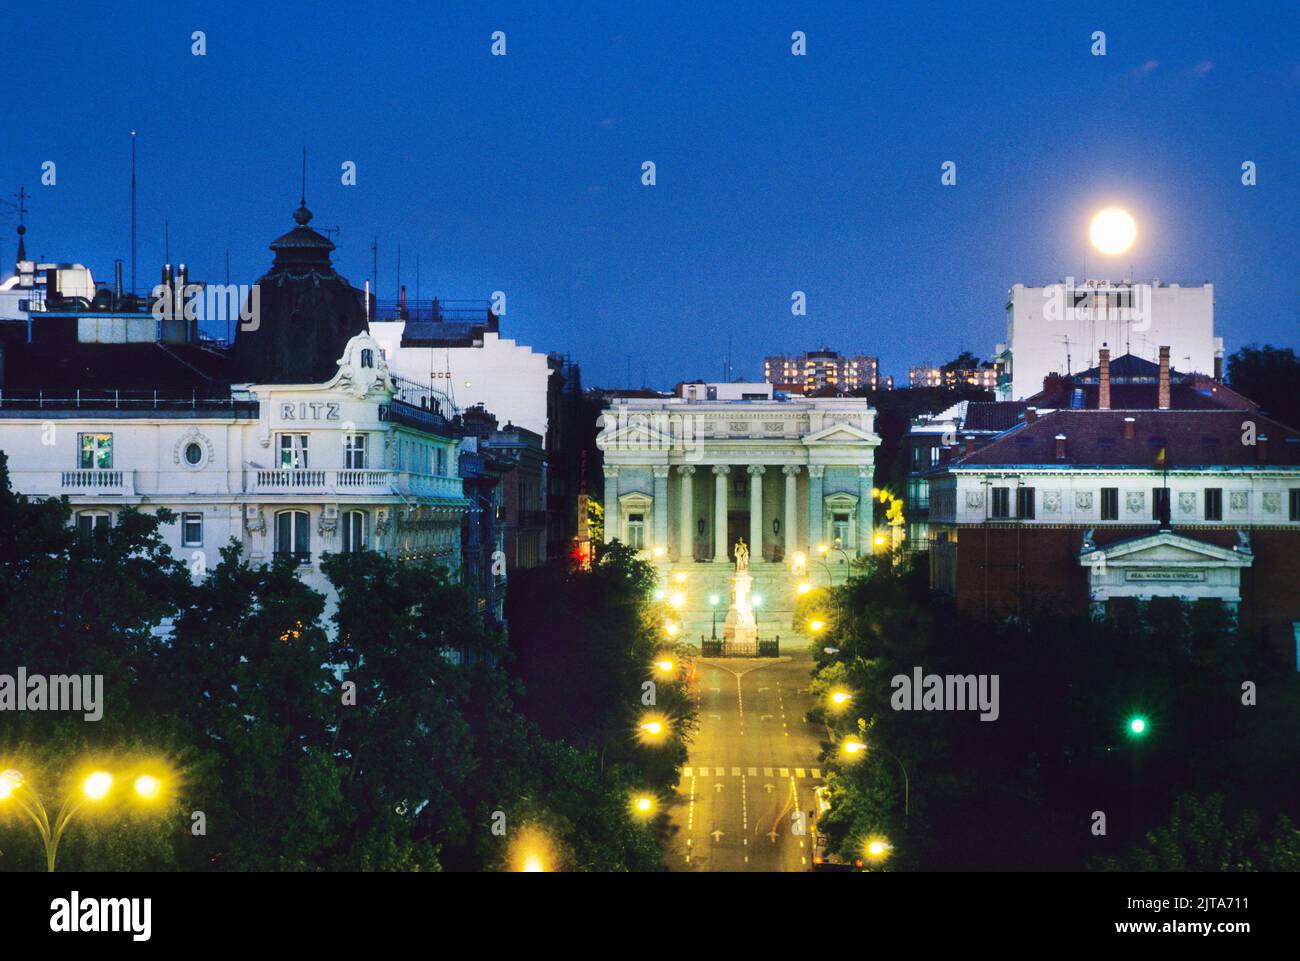 Madrid Ritz Hotel, Prado Museum at night. Elevated view at night with a full moon and city lights. Madrid, Spain, Europe Stock Photo